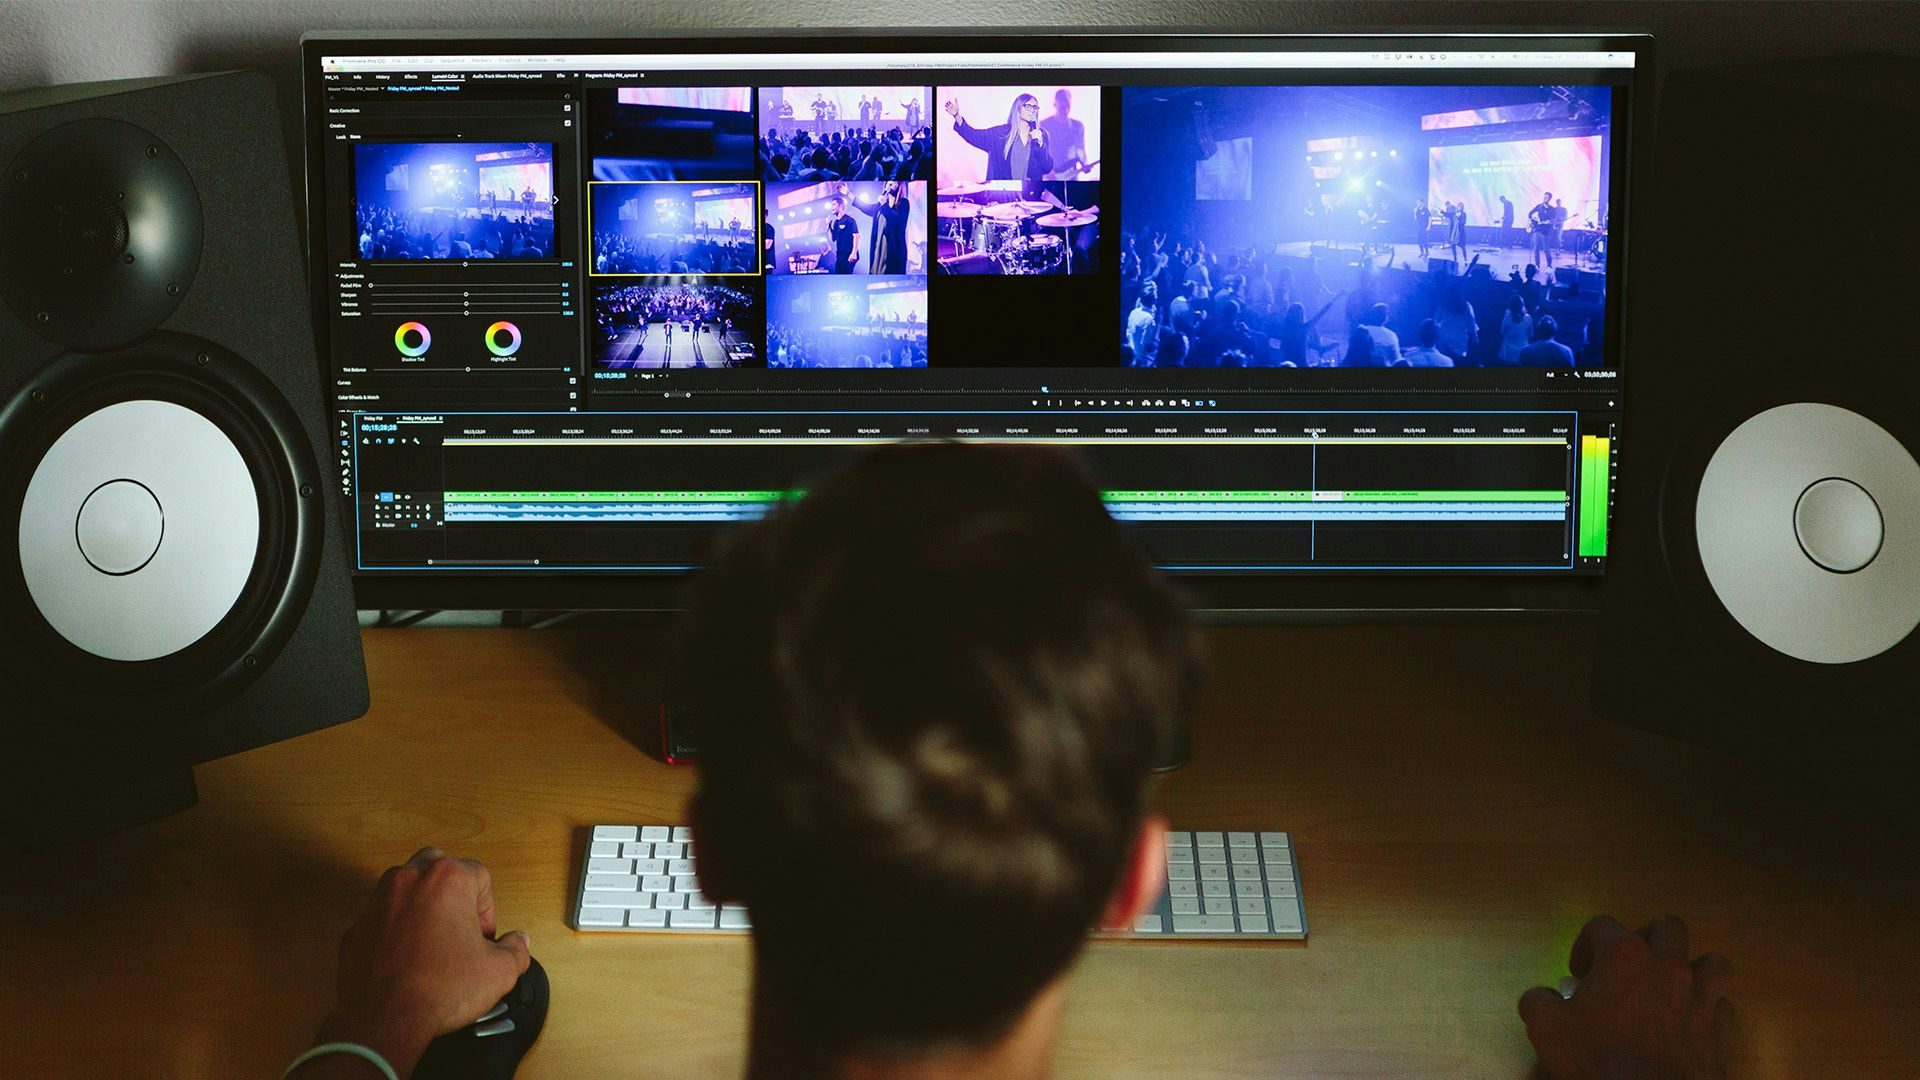 What's the best free and the best paid video editing software? Tell us for $5!